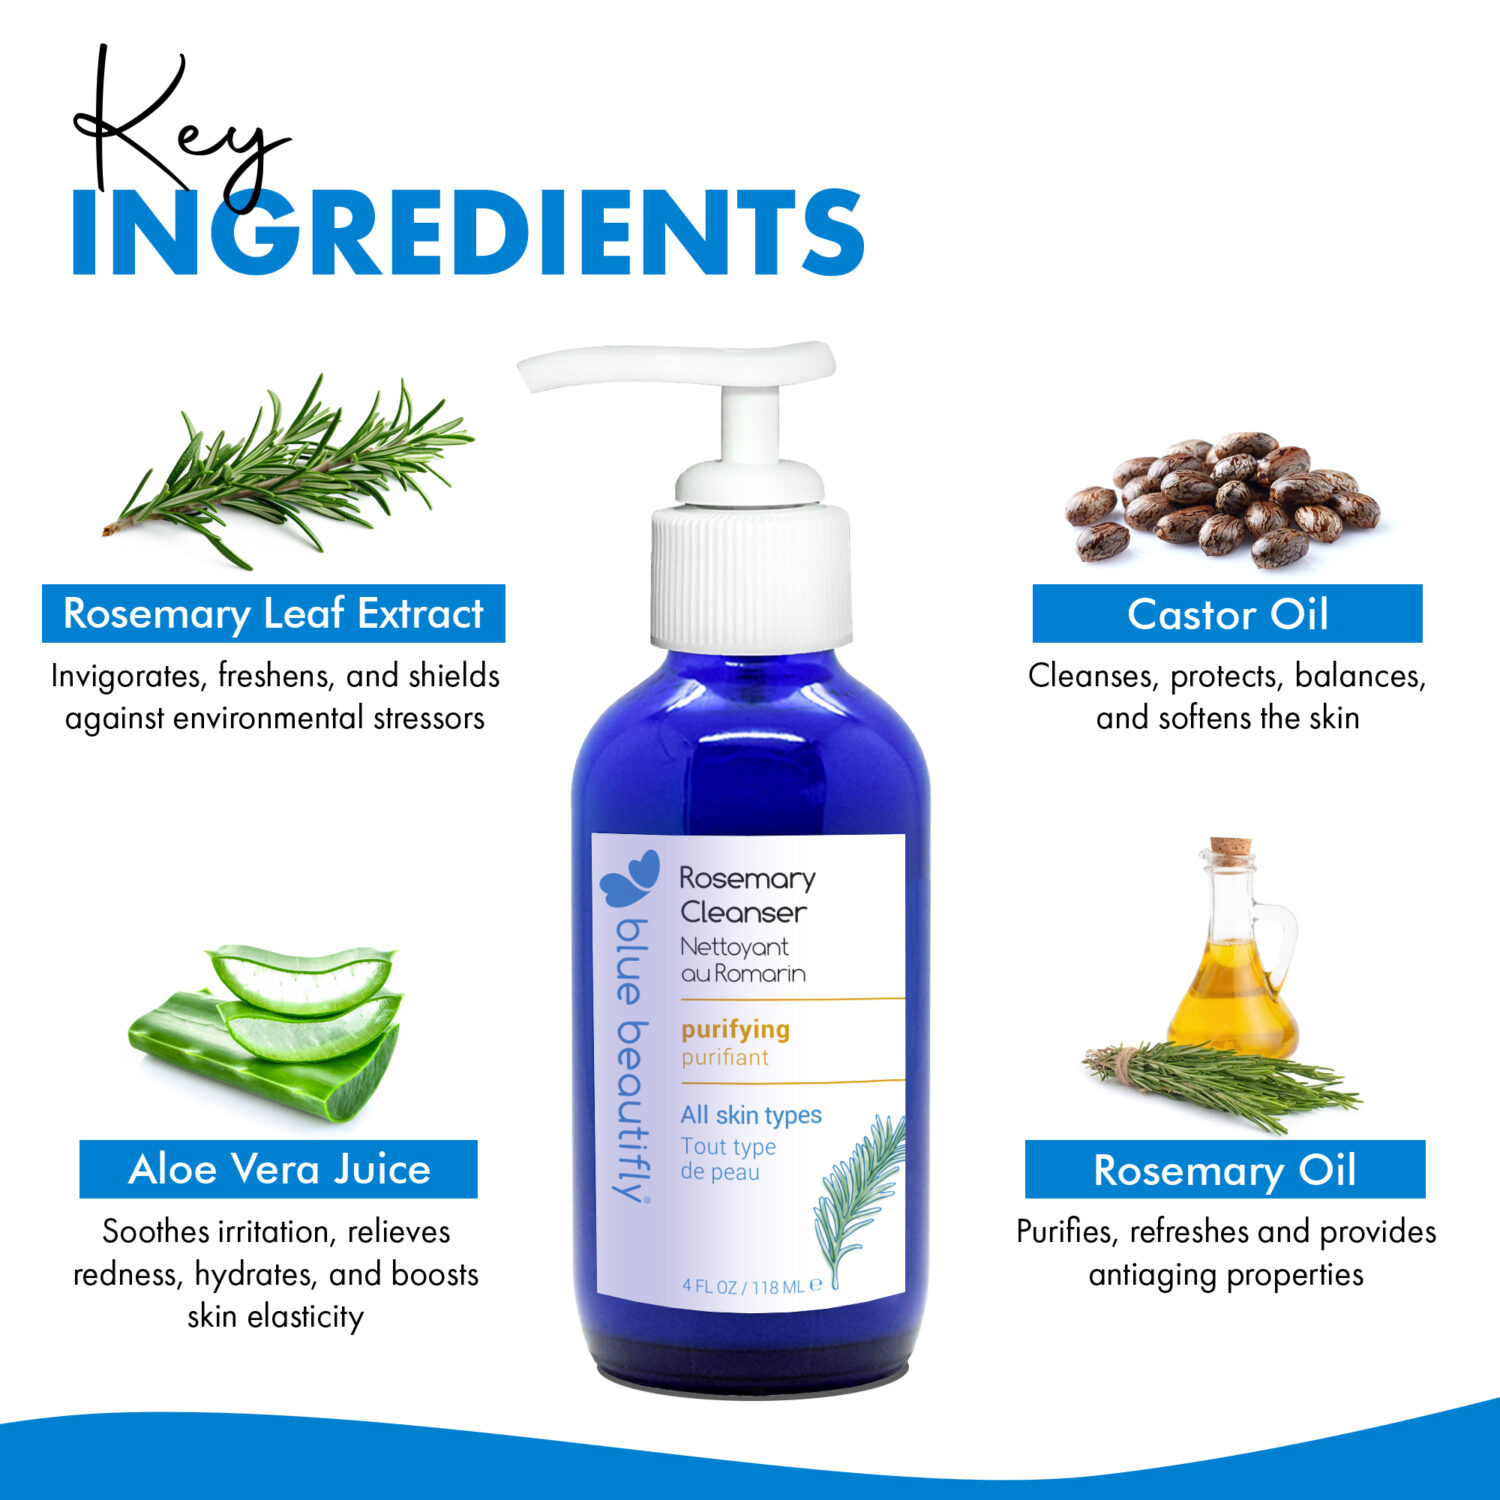 Blue Beautifly Rosemary Cleanser key ingredients are rosemary leaf extract, castor oil, aloe vera juice, and rosemary oil